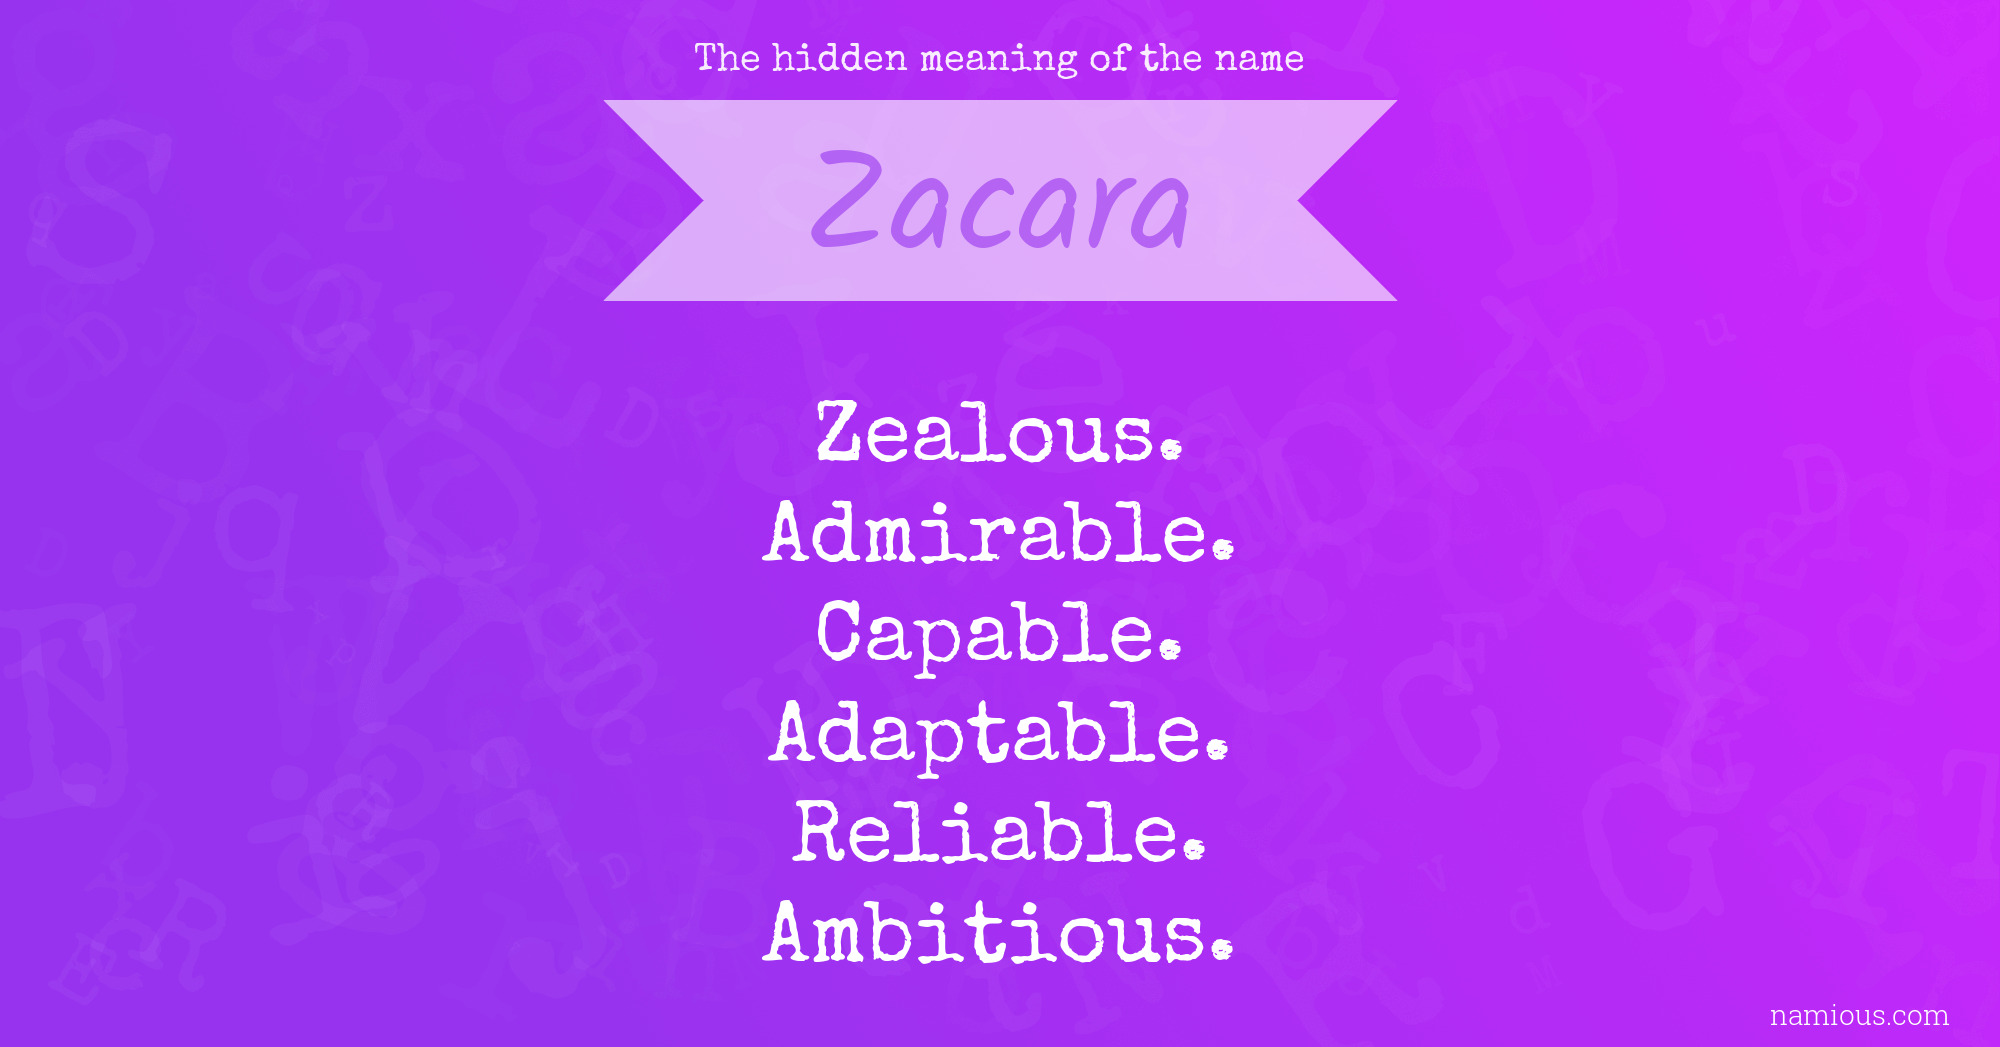 The hidden meaning of the name Zacara